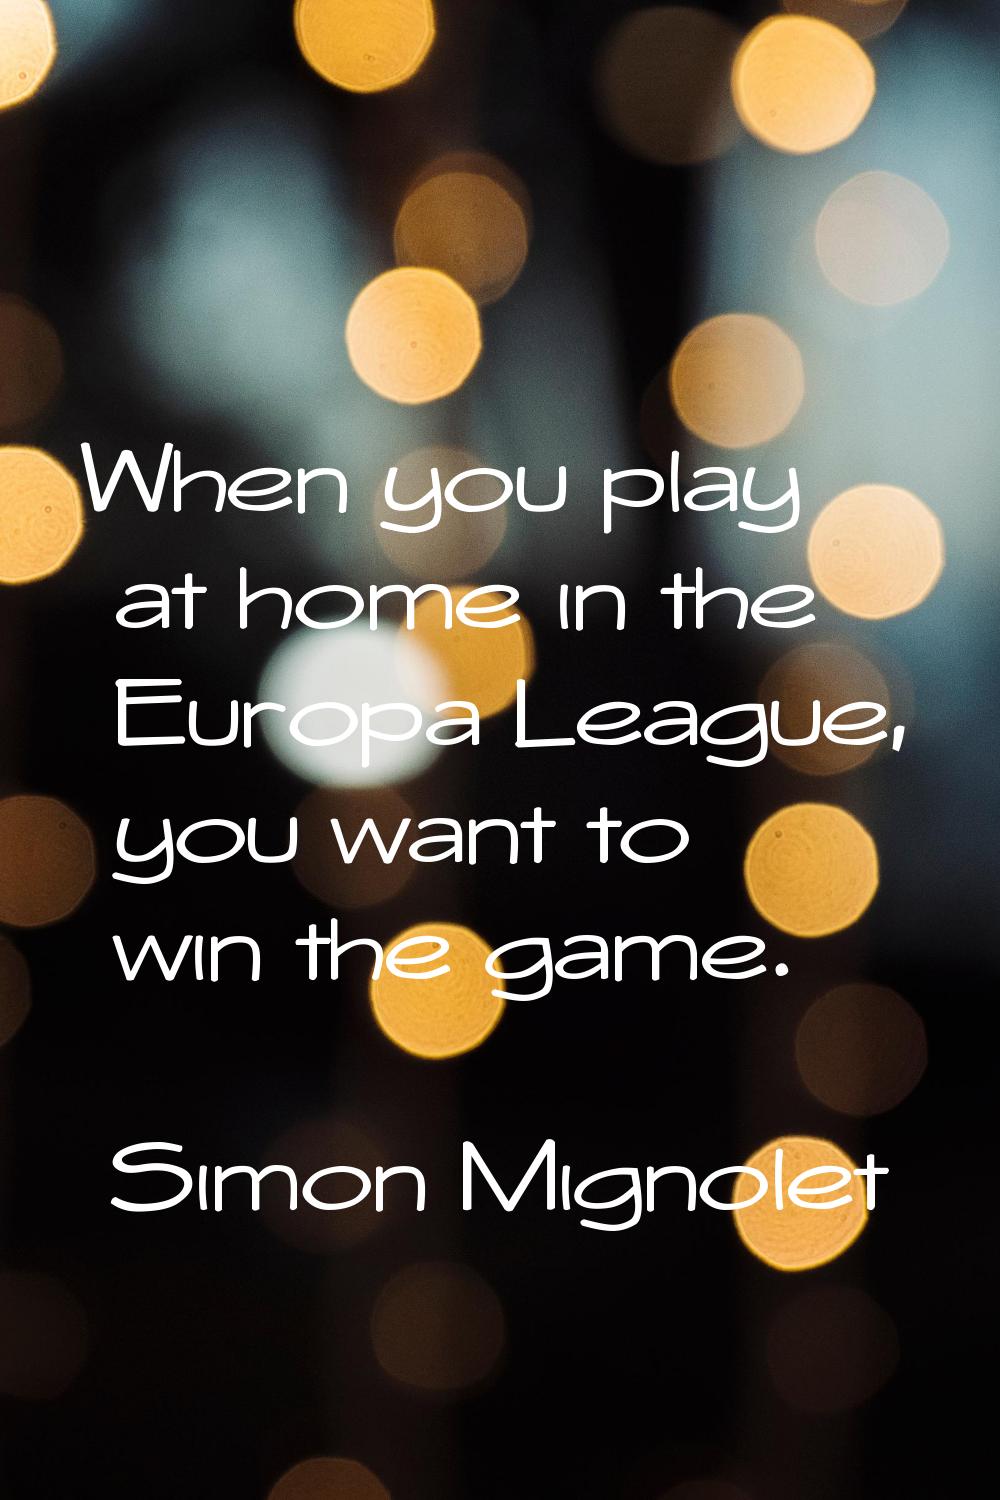 When you play at home in the Europa League, you want to win the game.